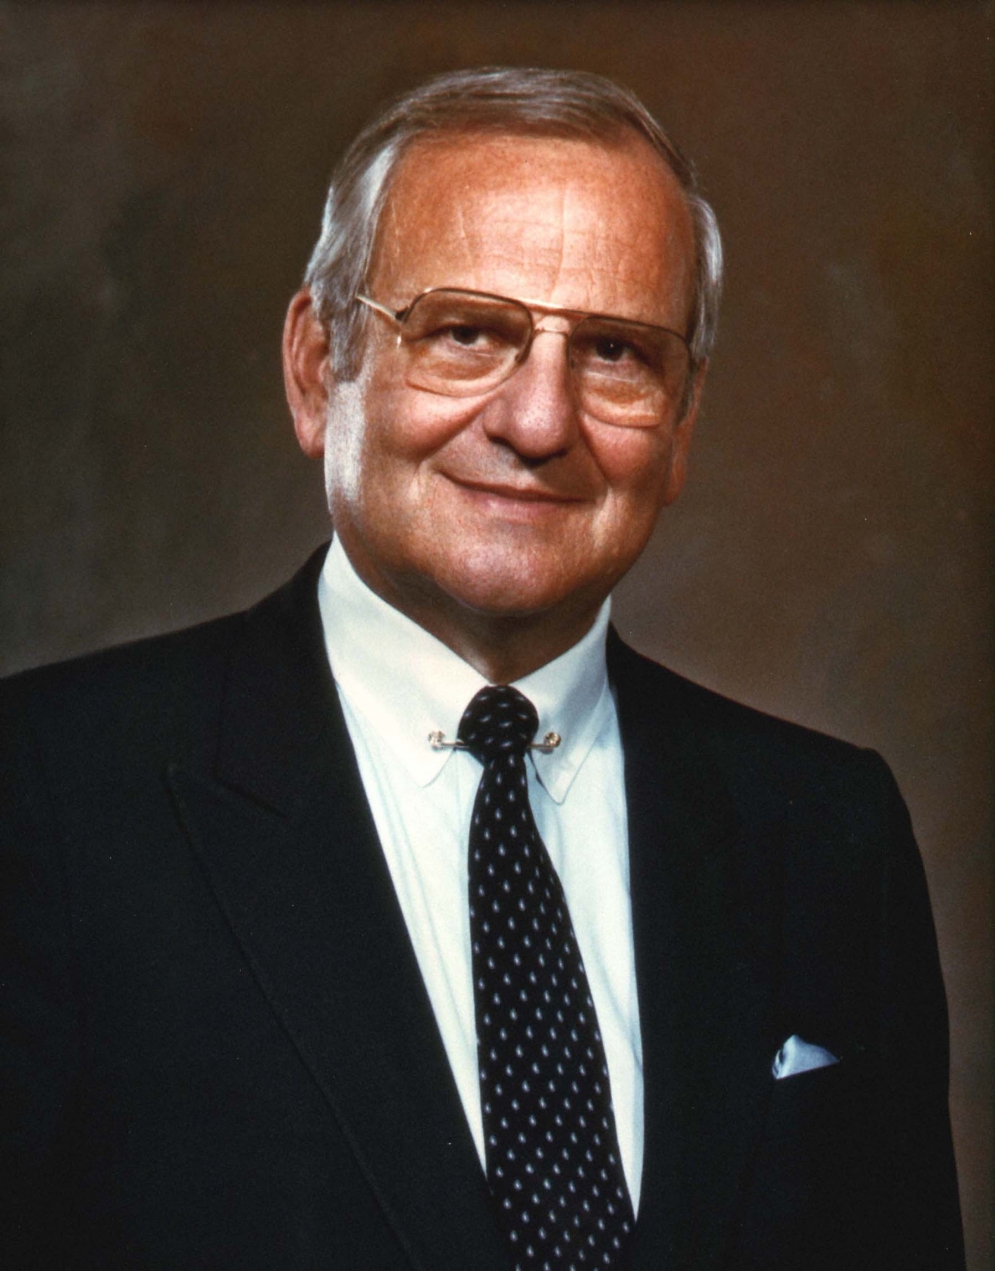 Auto industry icon Lee Iacocca has passed away at the age of 94.